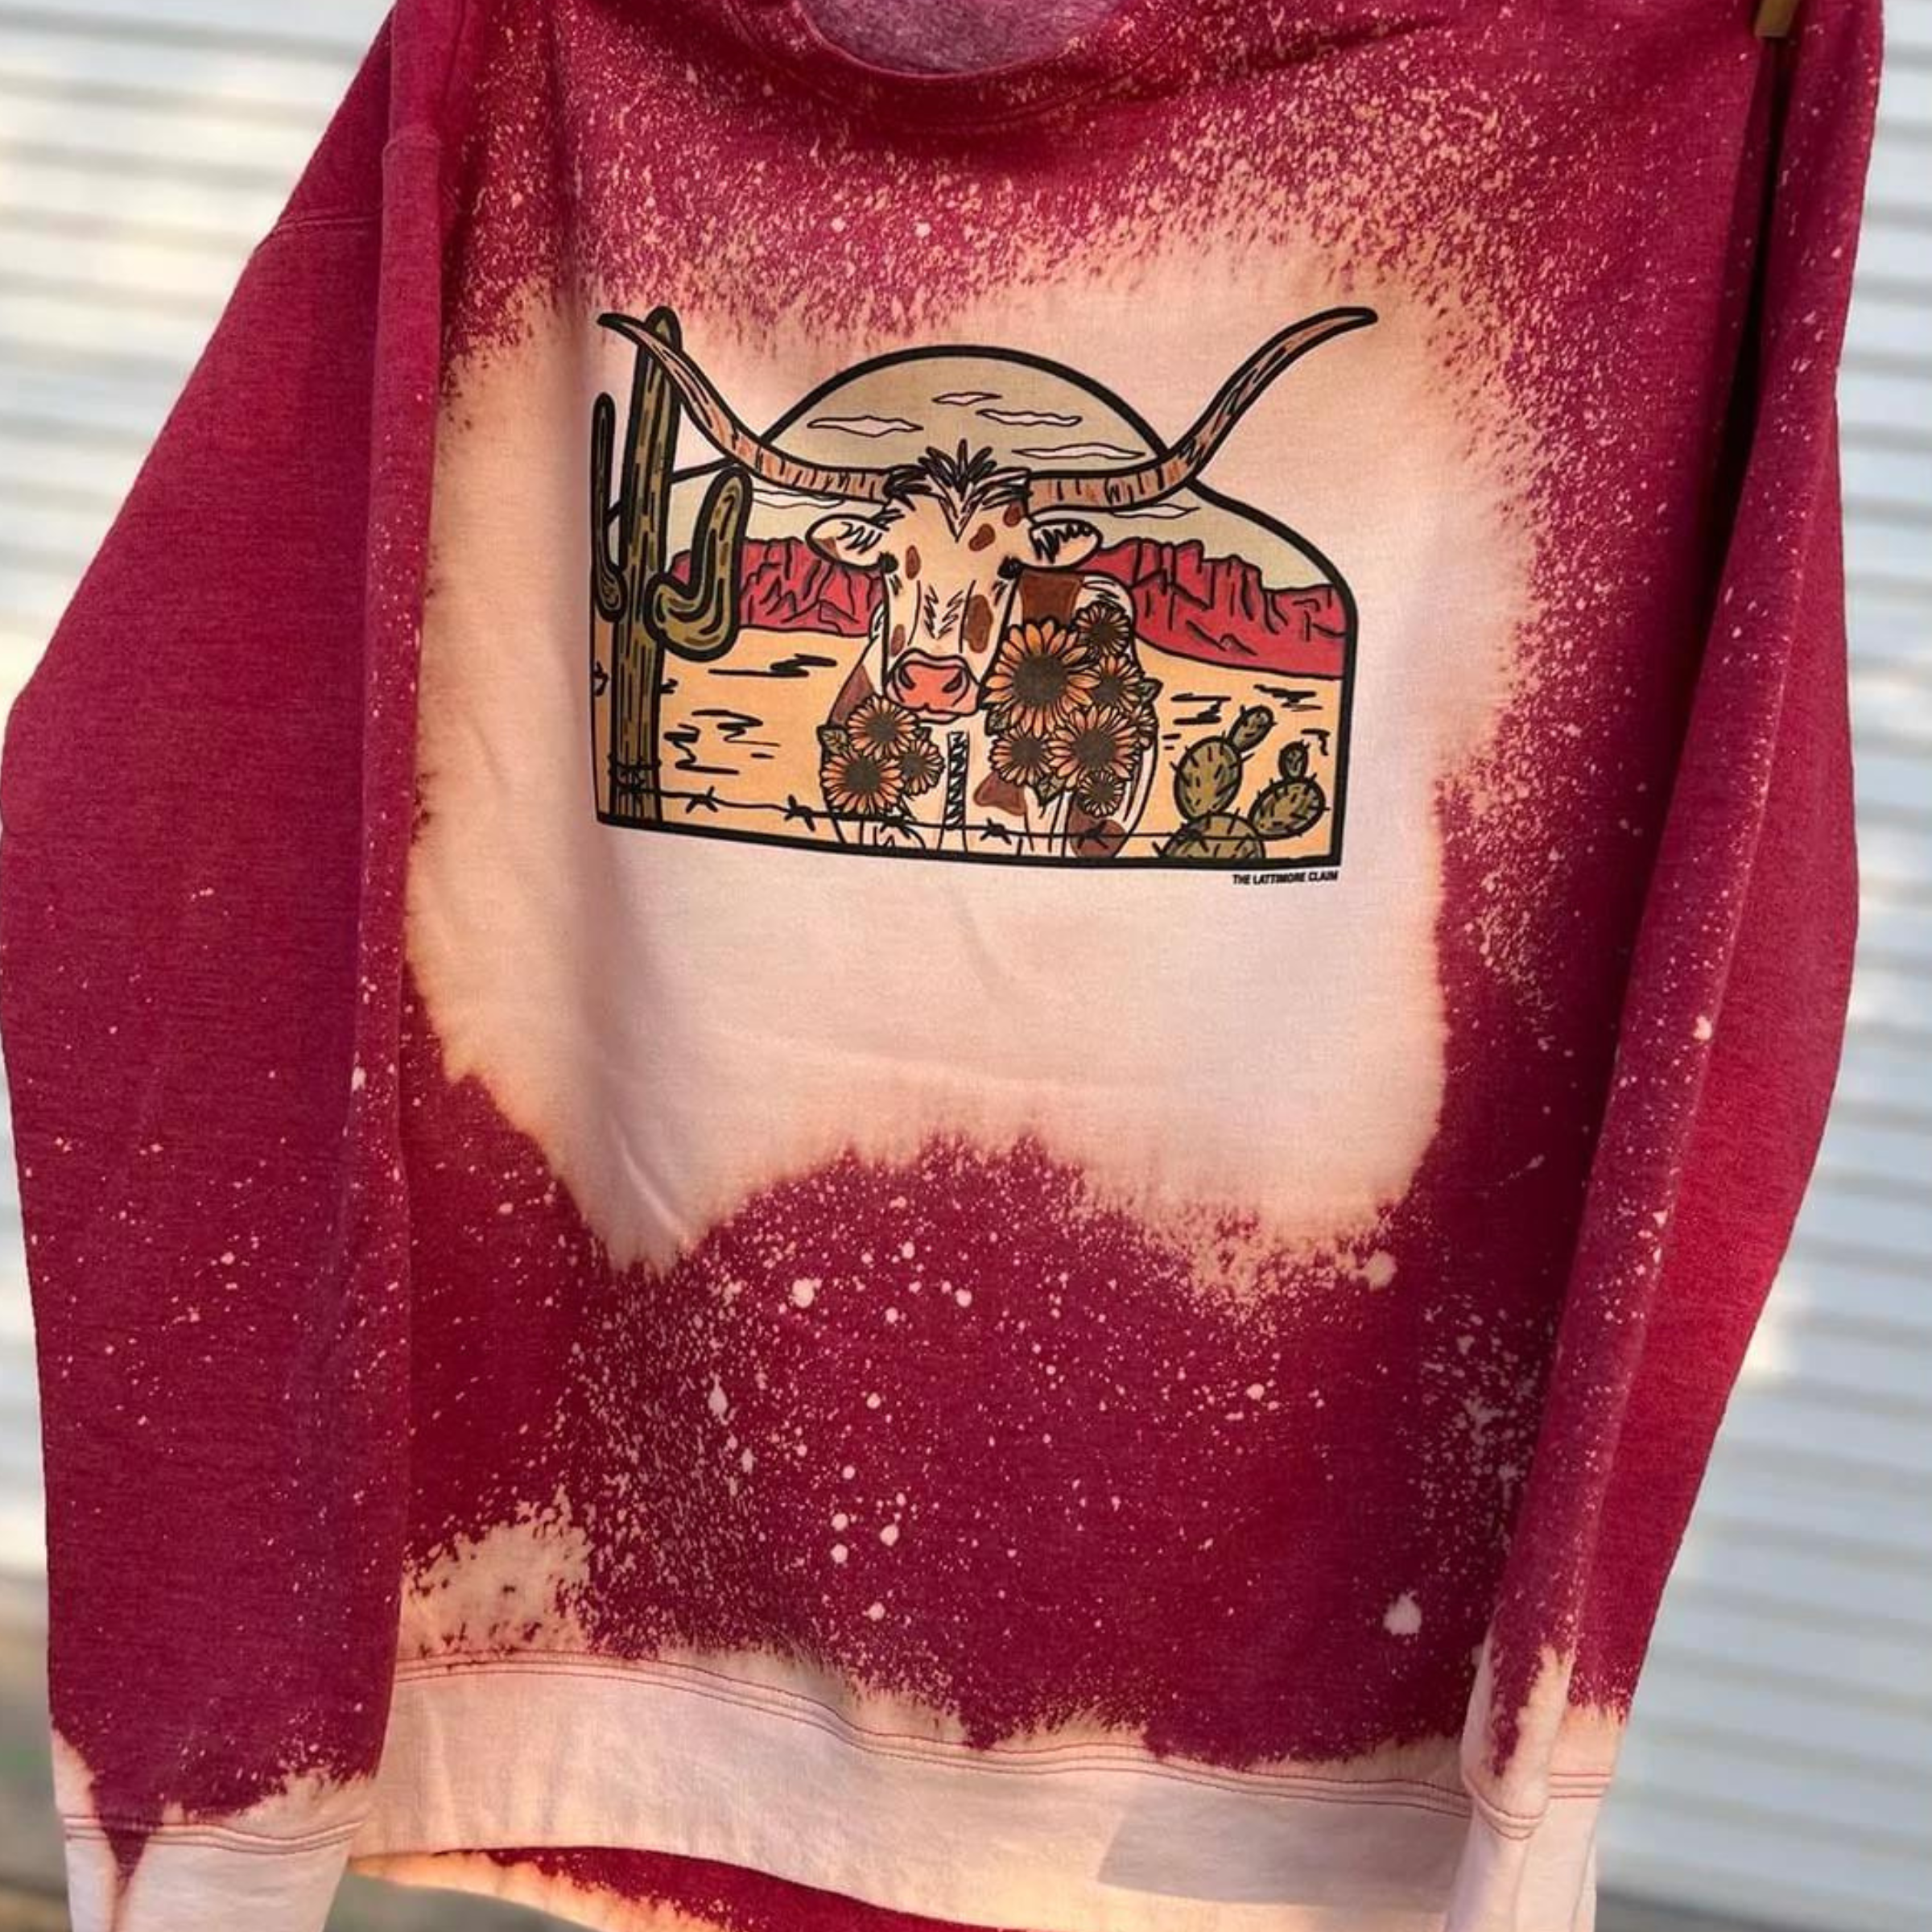 This bleached red graphic sweatshirt includes a crew neckline, long sleeves, and cute hand drawn design of a desert scene with a longhorn in the middle. This sweatshirt is shown being held up.  